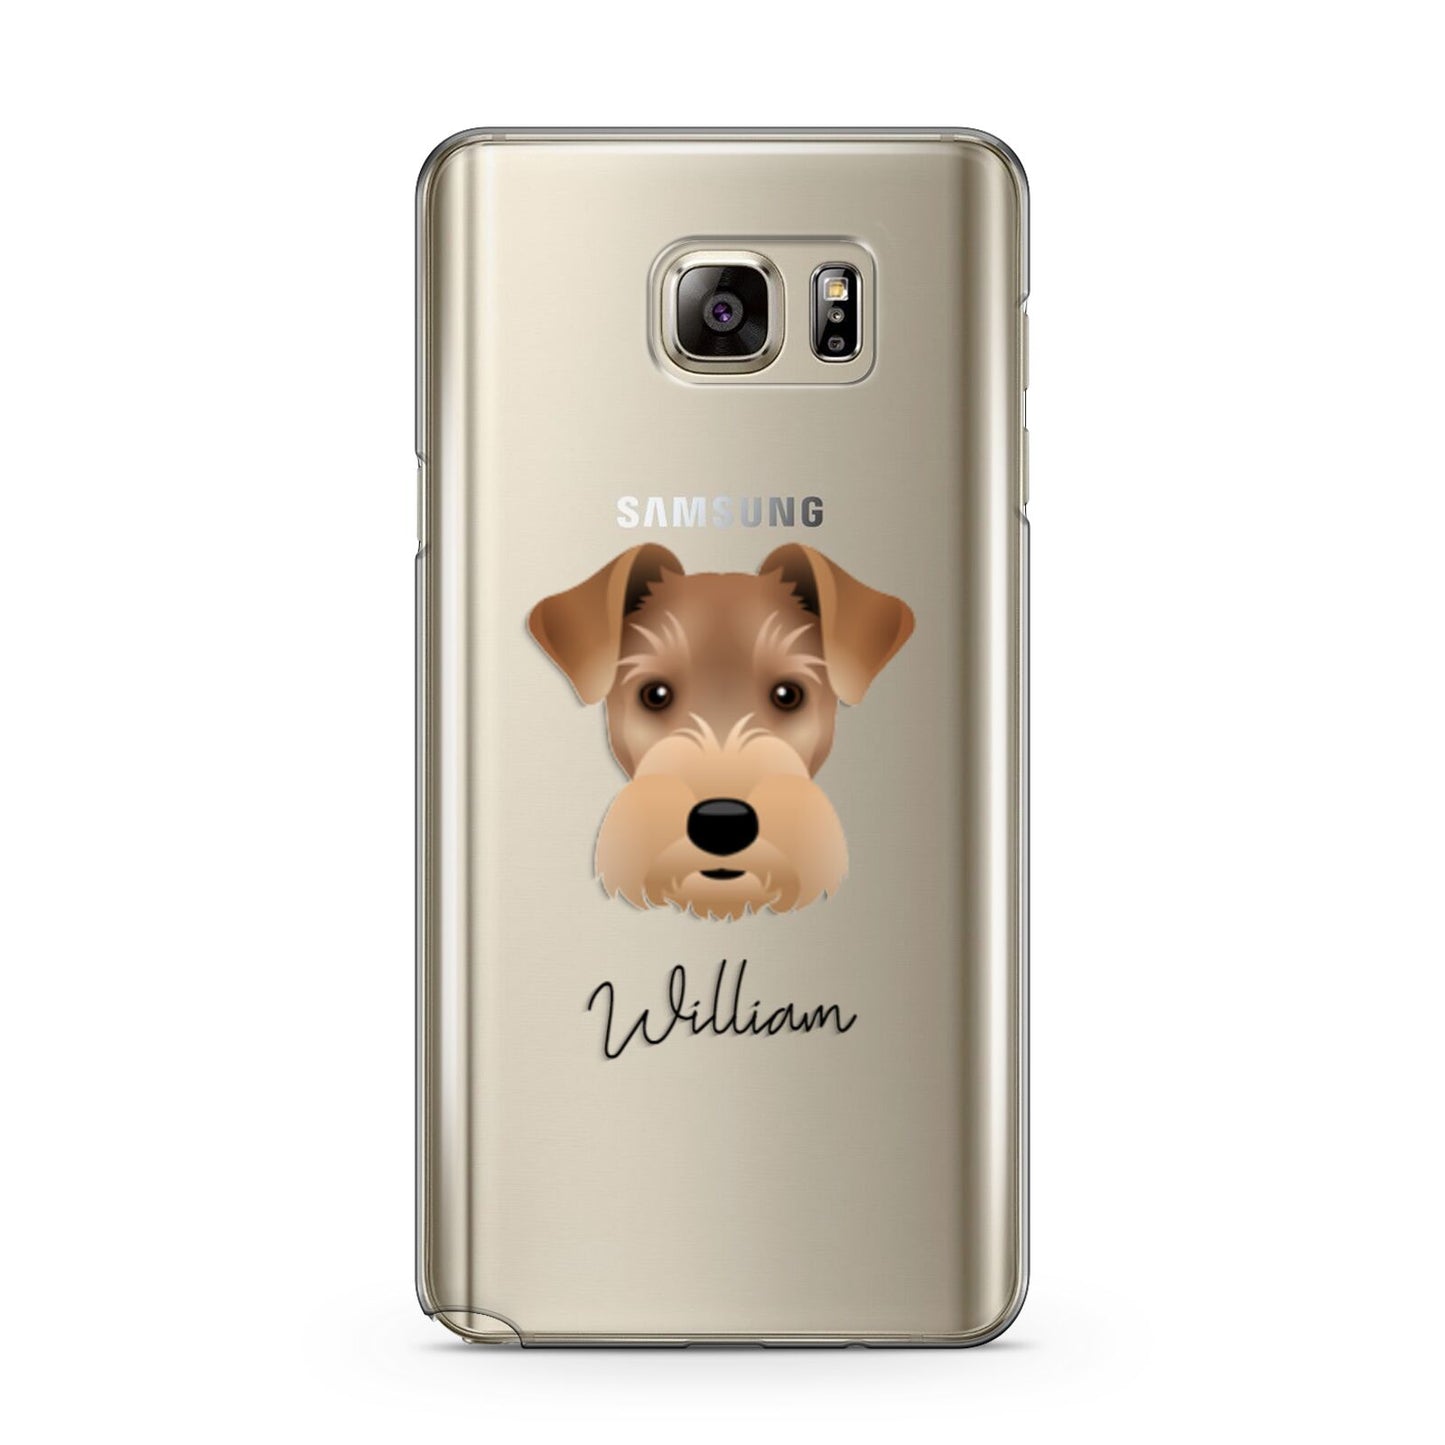 Welsh Terrier Personalised Samsung Galaxy Note 5 Case